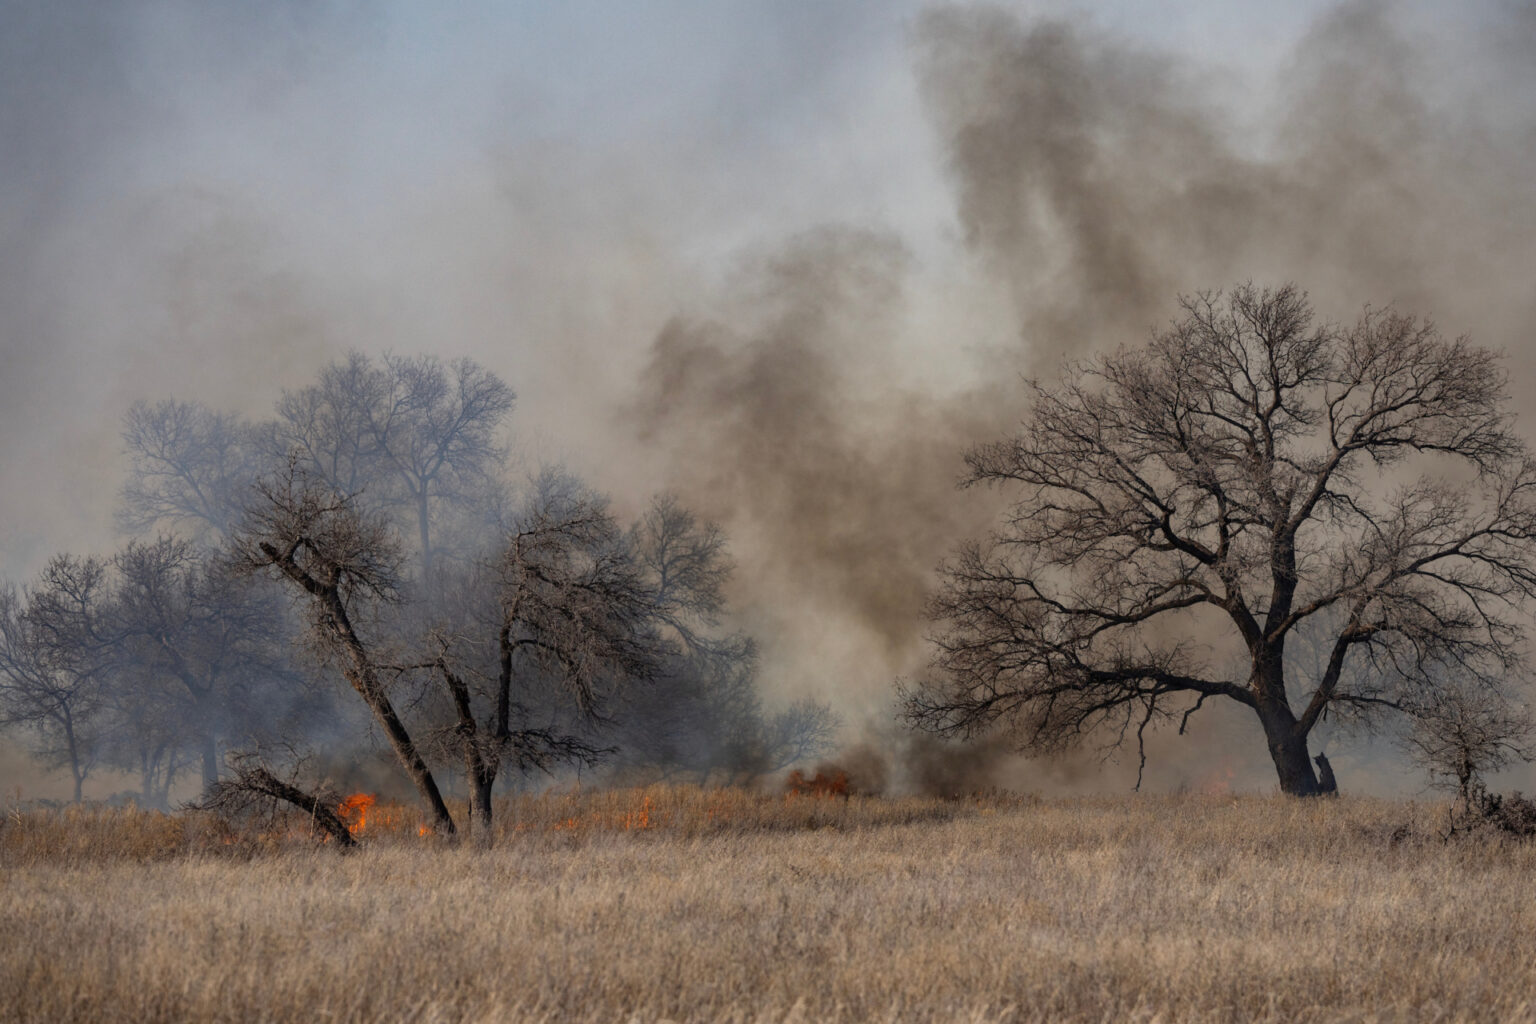 Black smoke and flames engulfed more than a million acres of grassland across the Texas Panhandle, but with the help of rain and enough recovery time, the grass can come back stronger. (Sam Craft/Texas A&M AgriLife.)